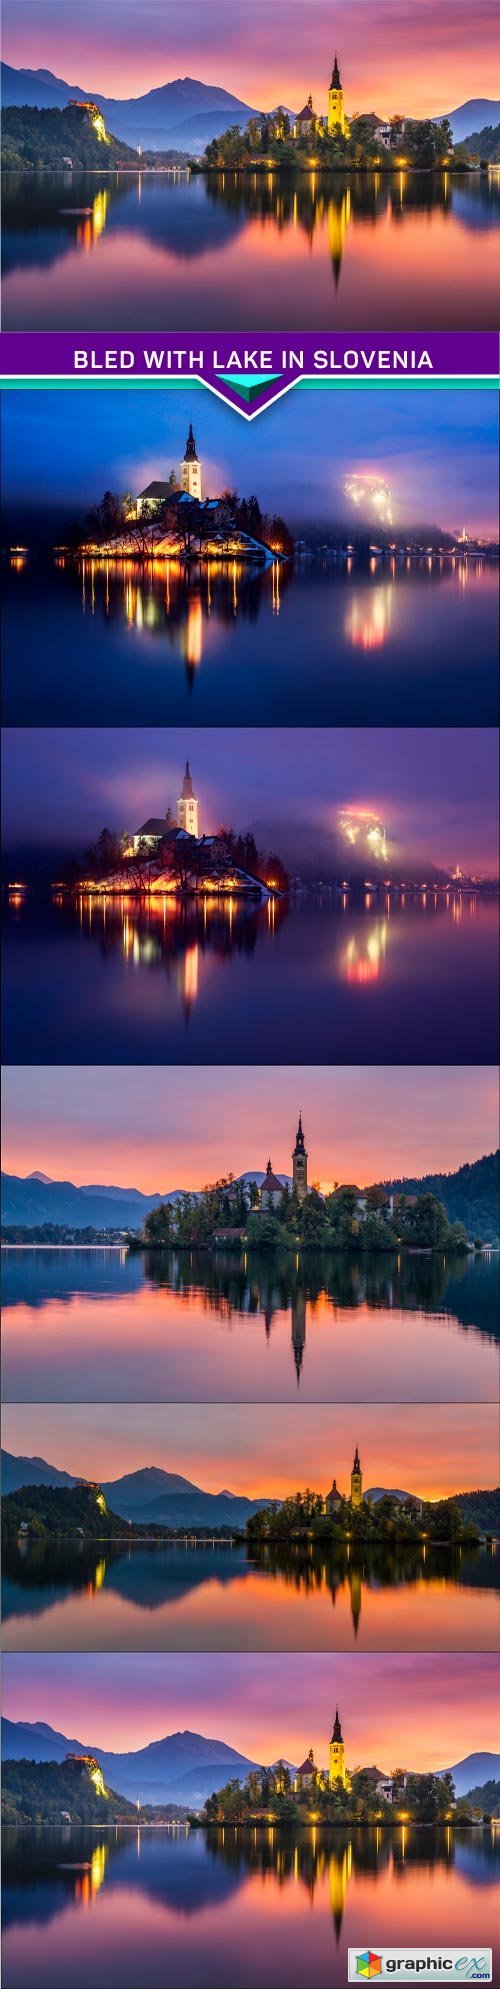 Bled with lake in Slovenia Europe 5x JPEG